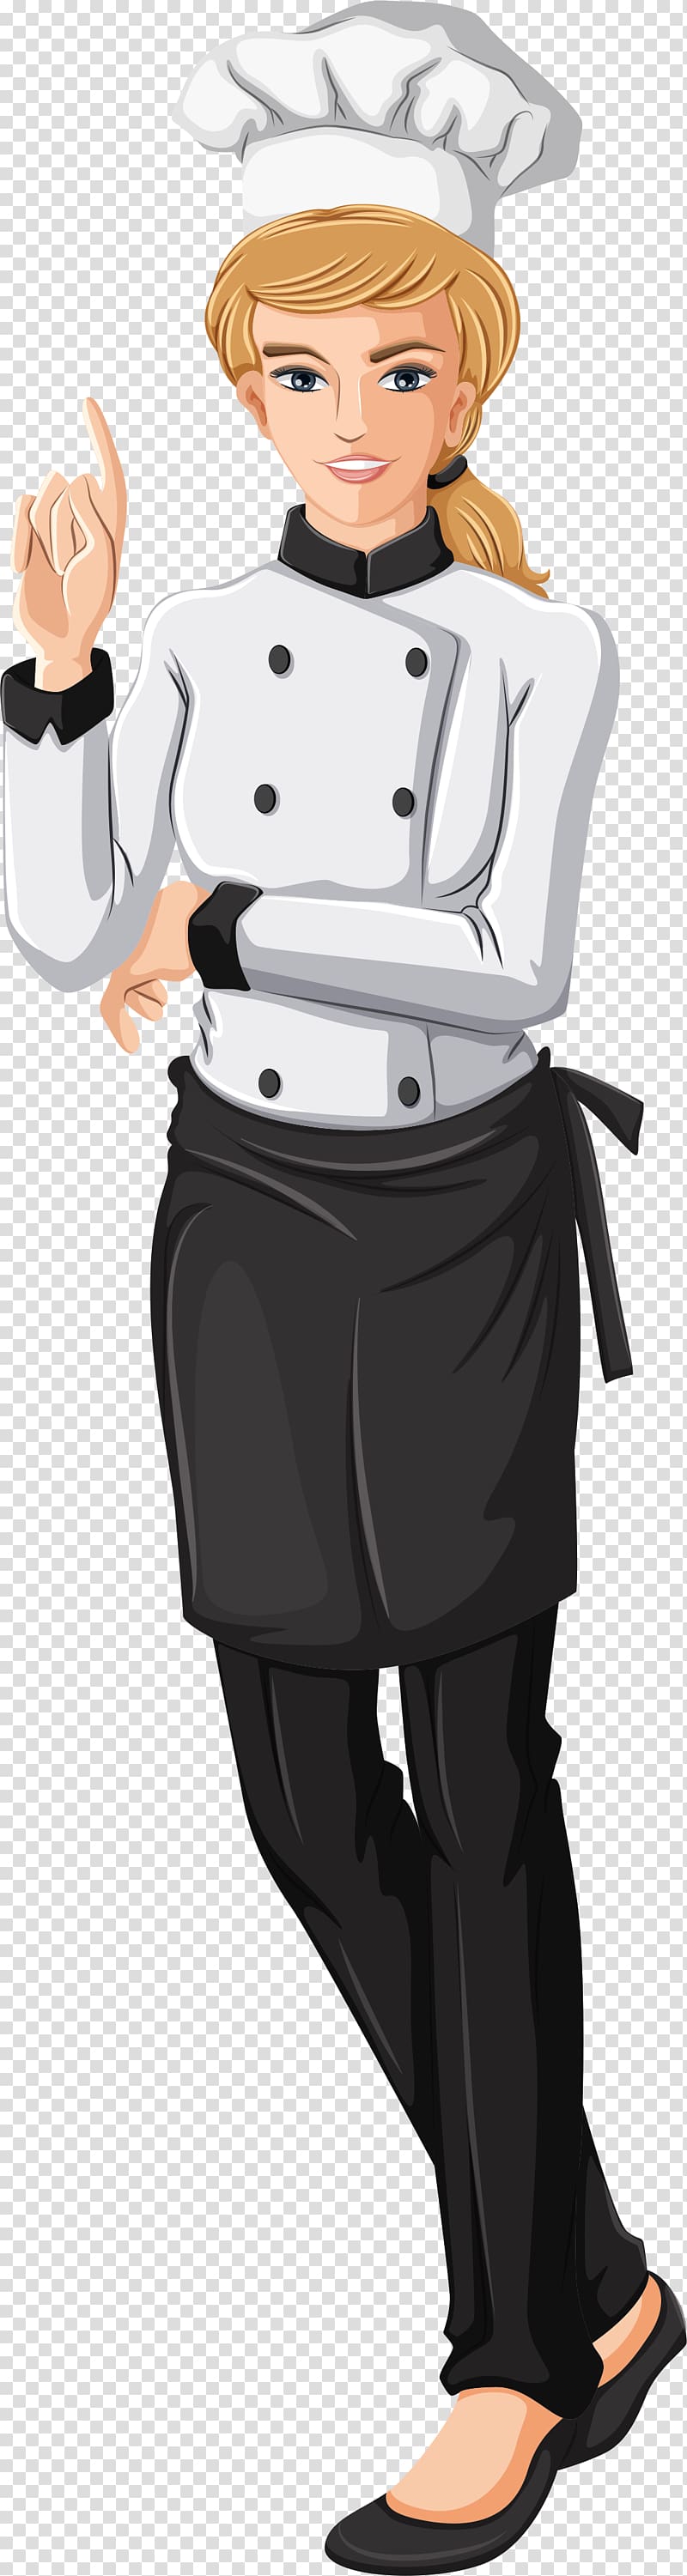 Chef Restaurant Cooking, female chef transparent background PNG clipart